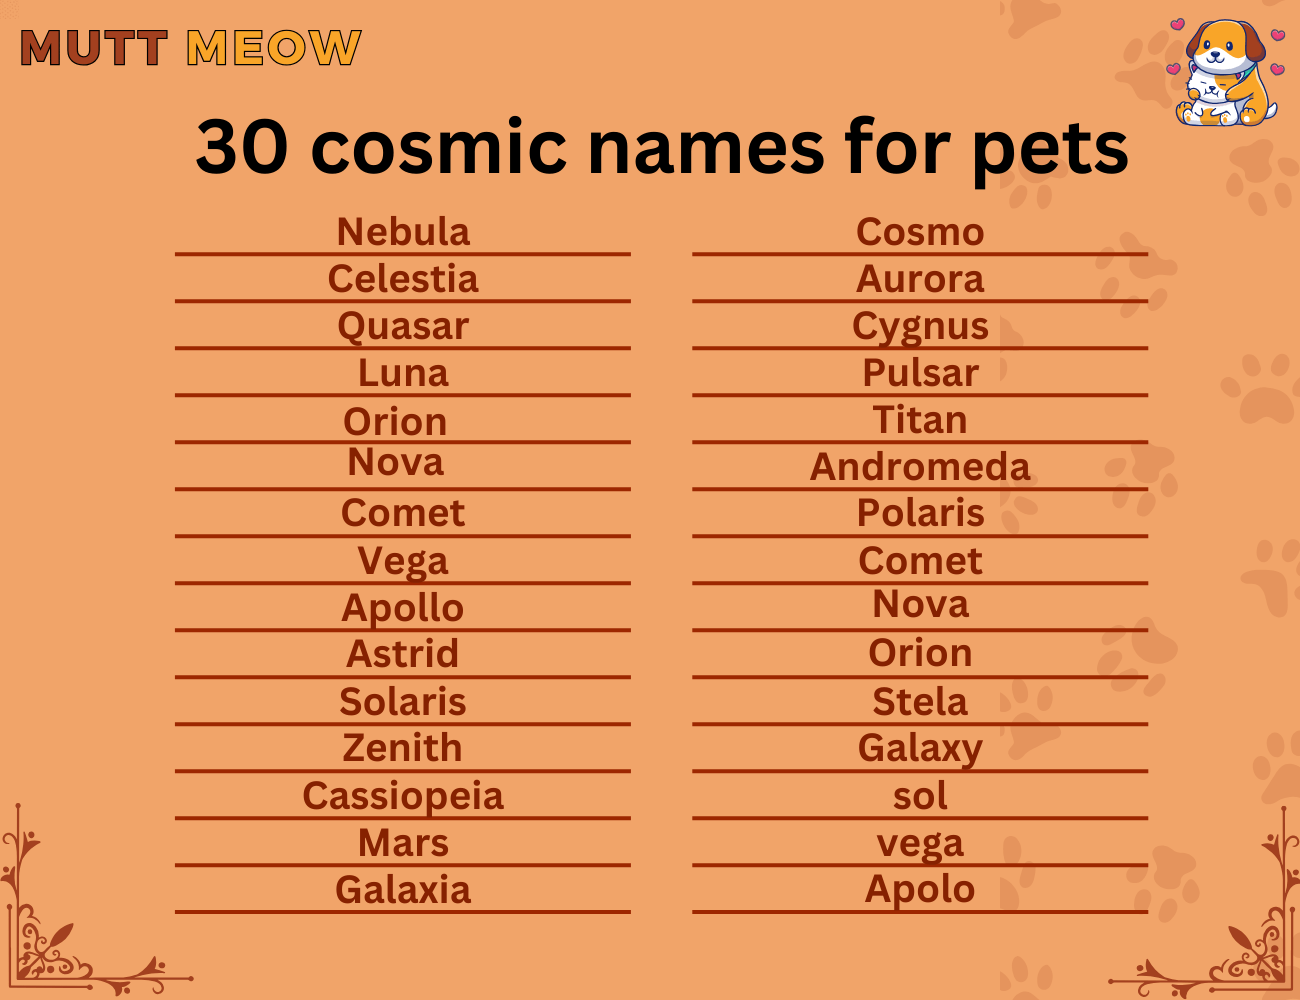 30 cosmic names for pets